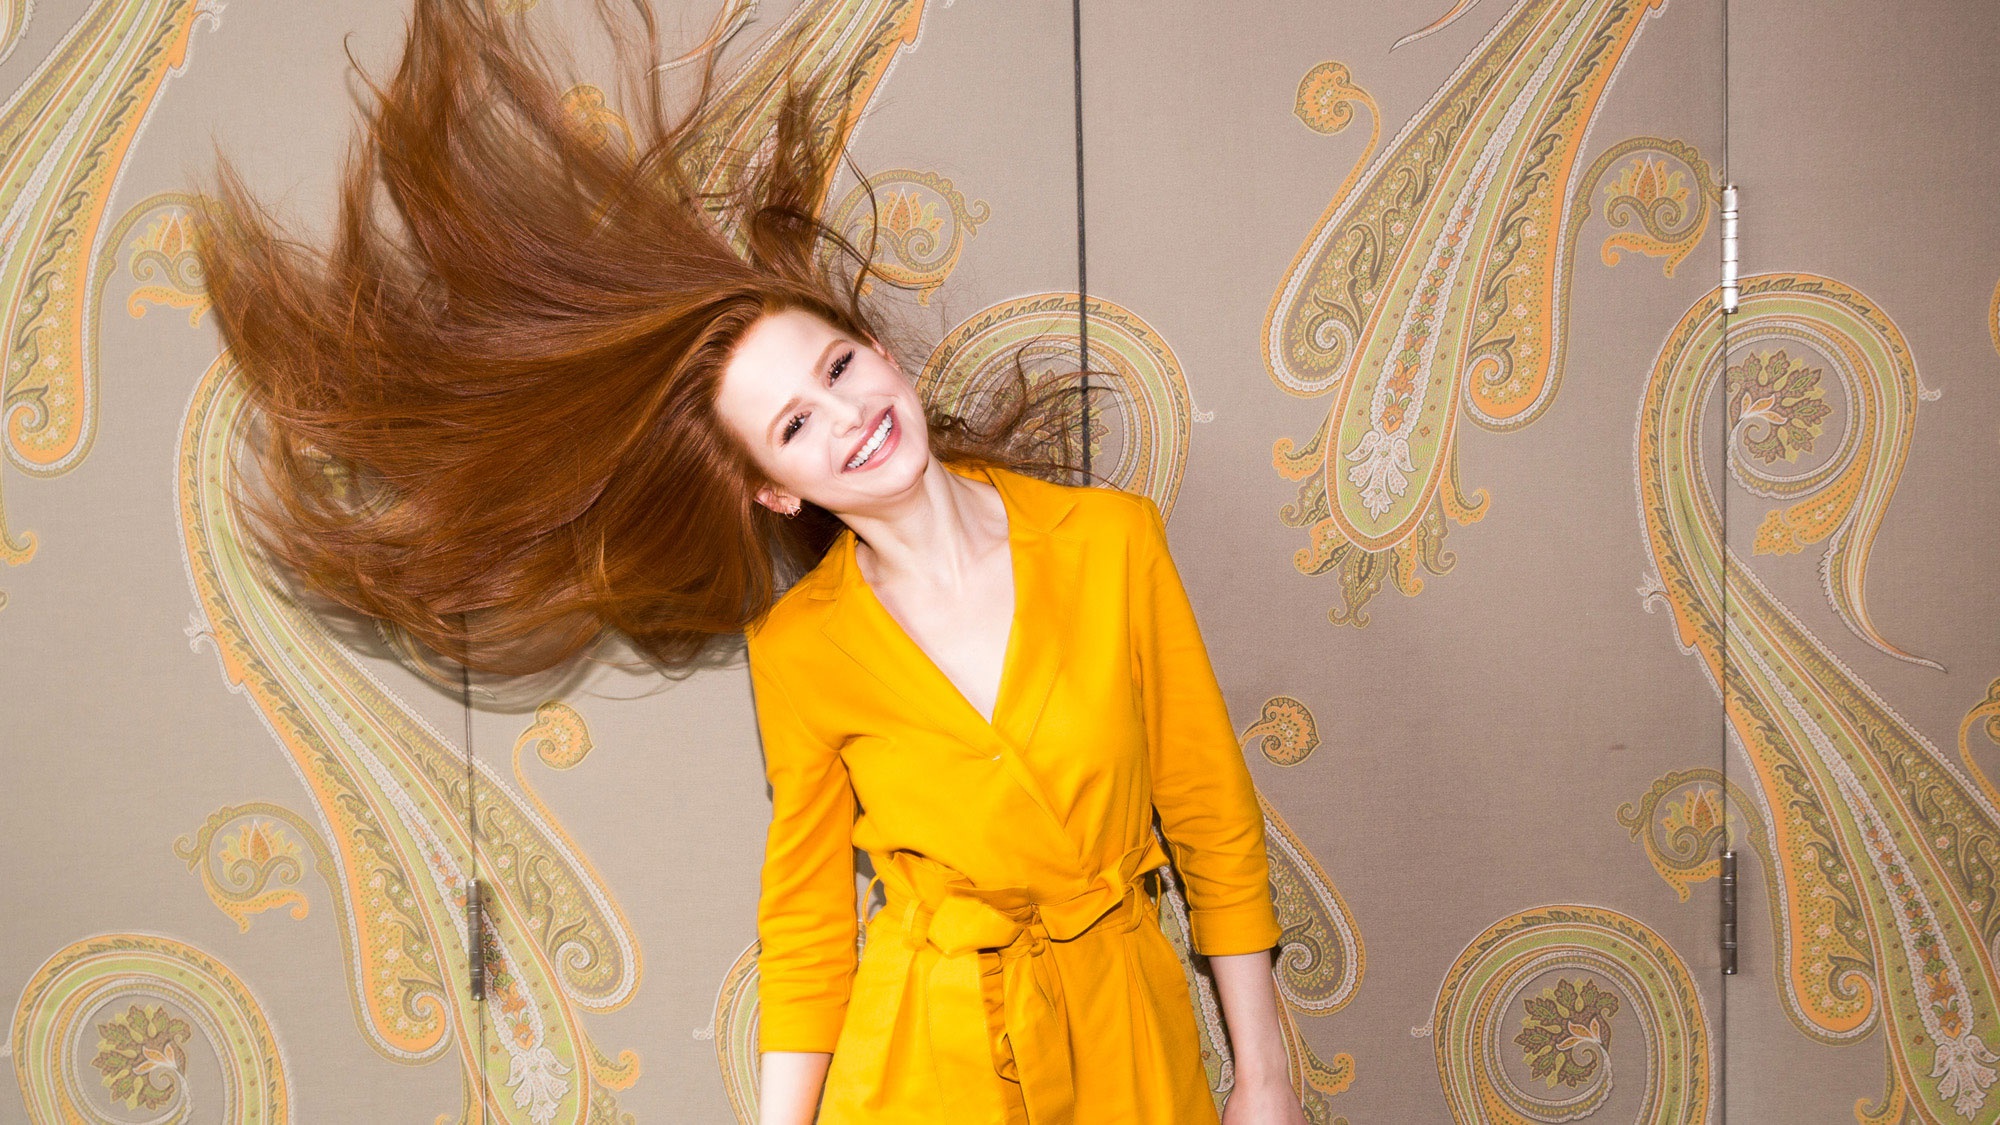 celebrity, madelaine petsch, actress, american, long hair, redhead, smile